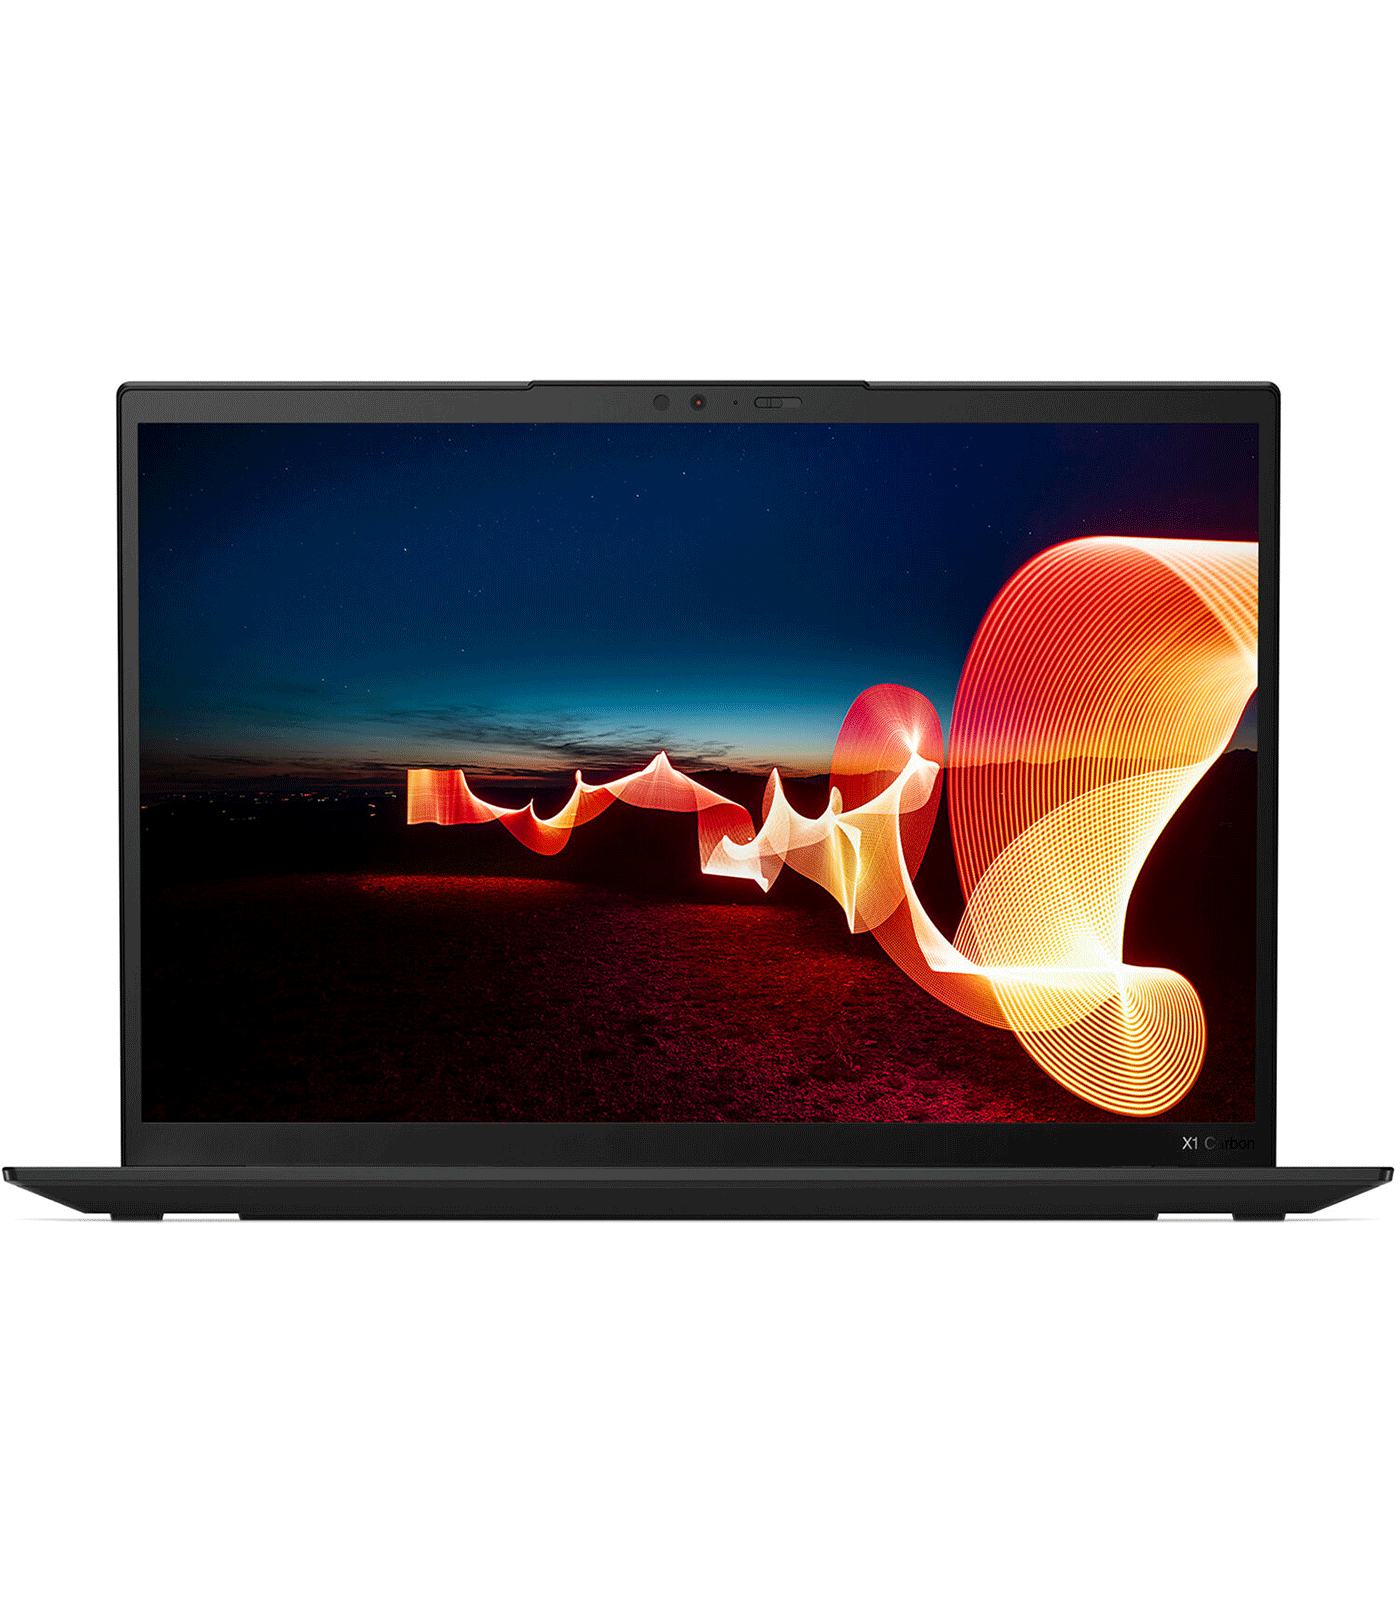 Lenovo ThinkPad X1 Carbon Gen 10 The Pinnacle of Portability and Performance​